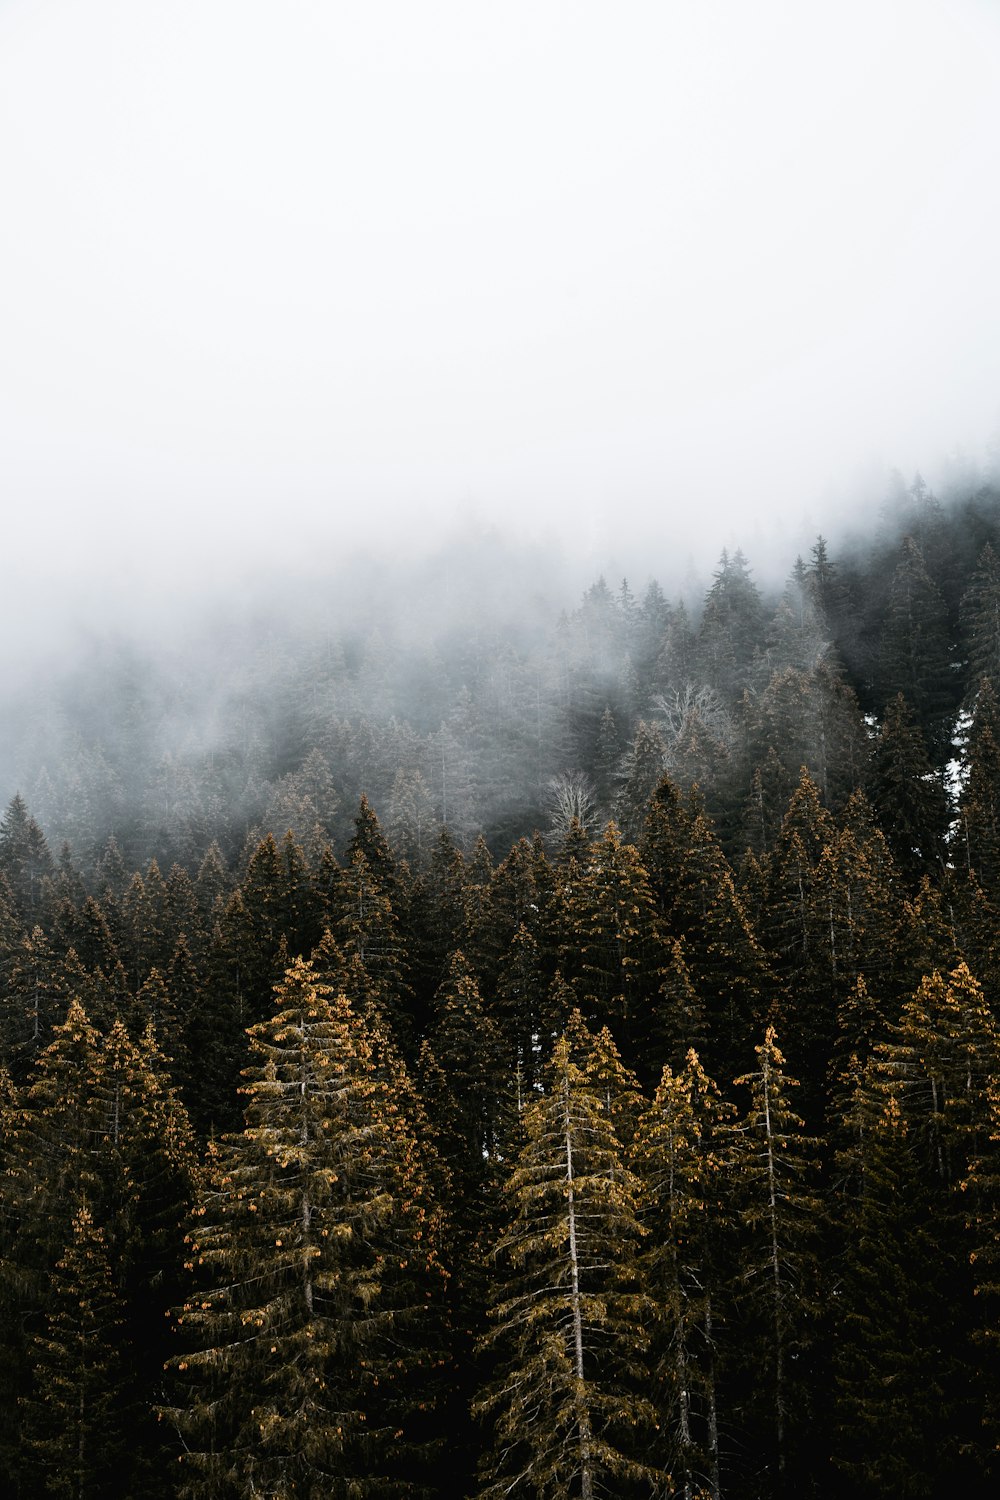 green pine trees covered with fog